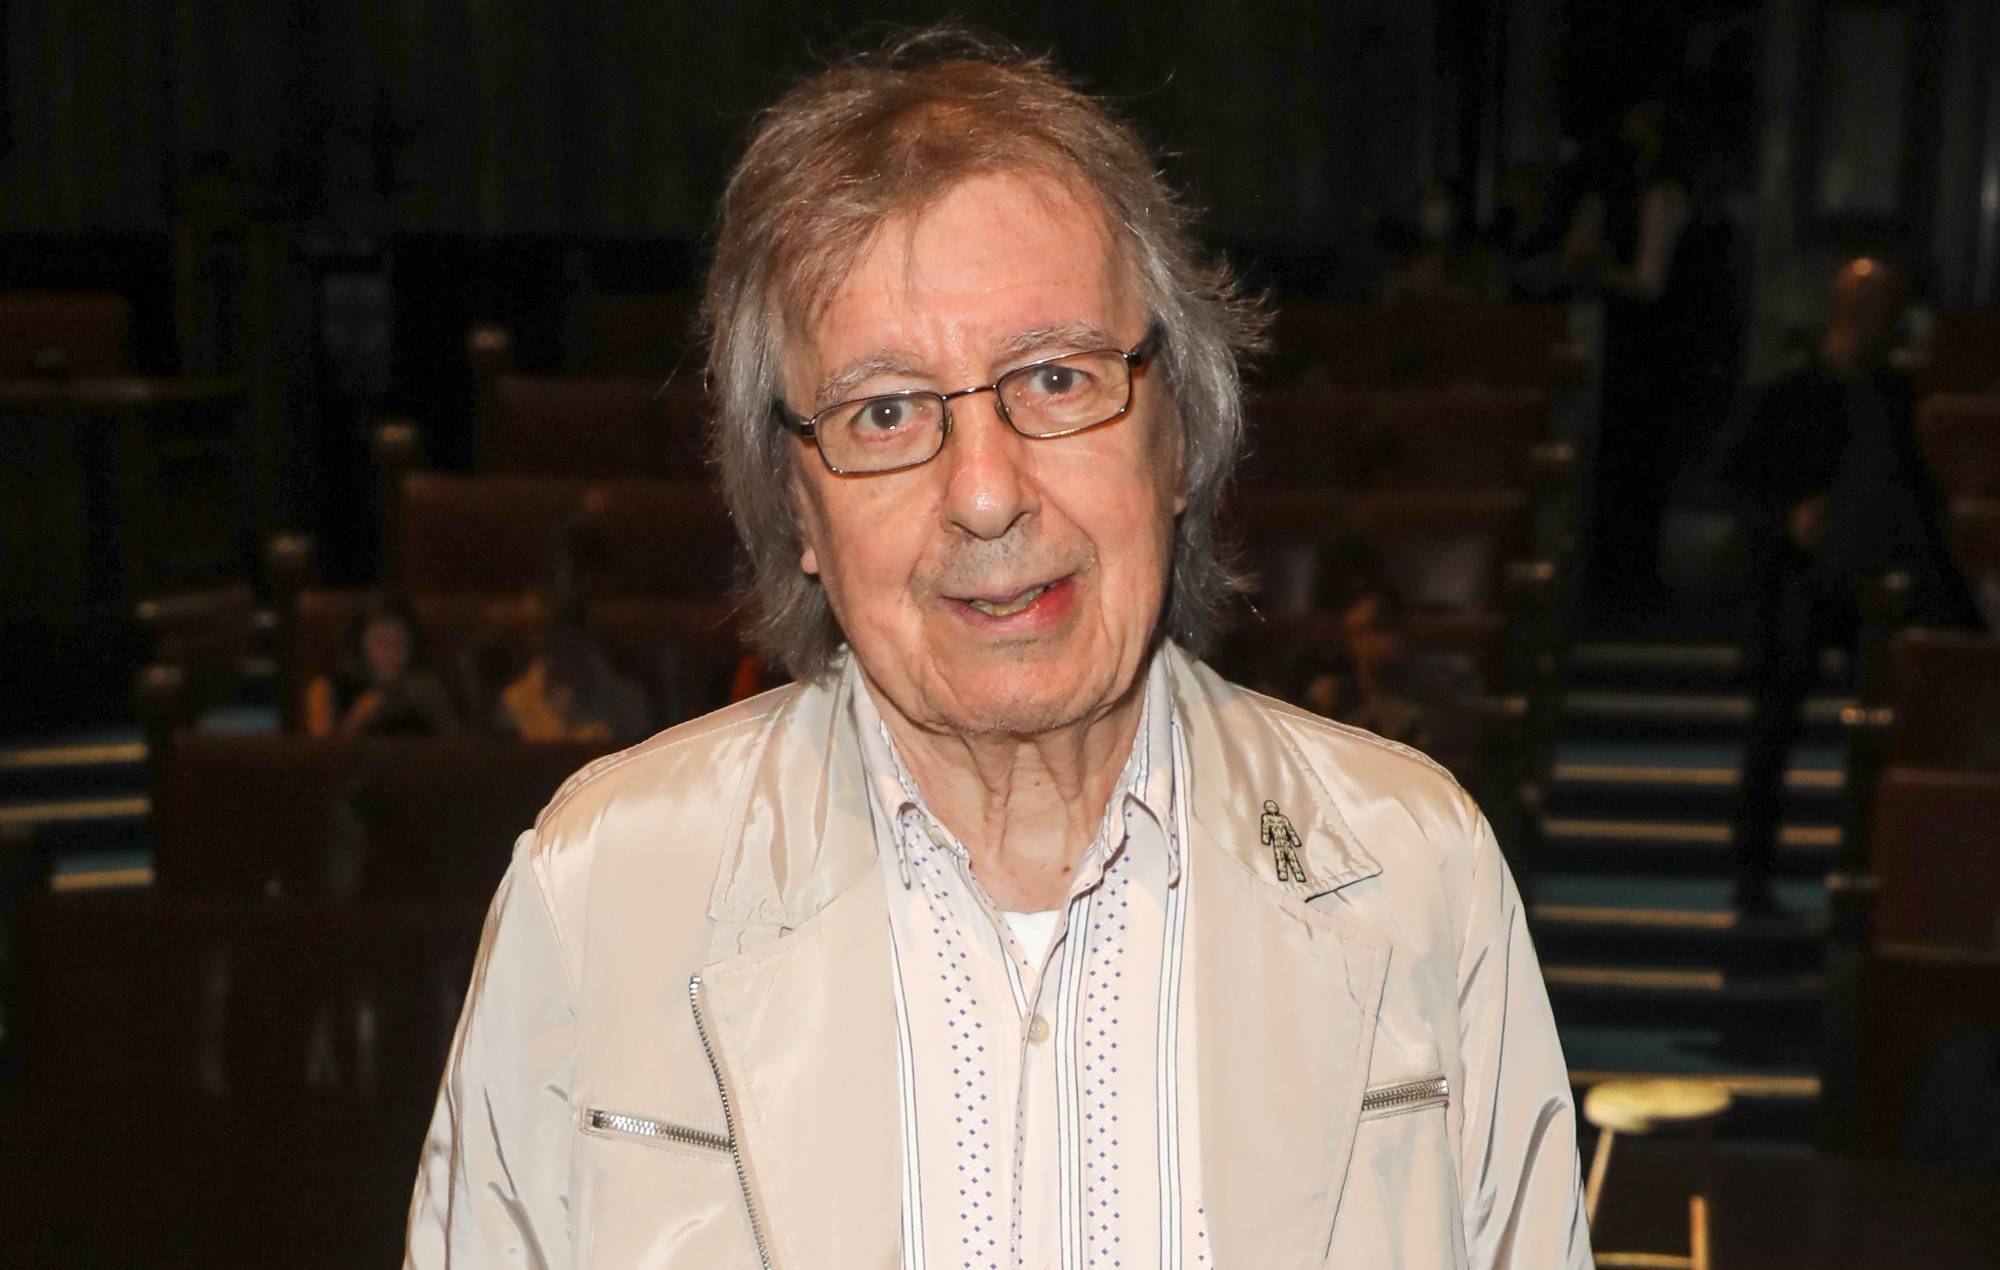 Bill Wyman opens up about his exit from The Rolling Stones – and life since